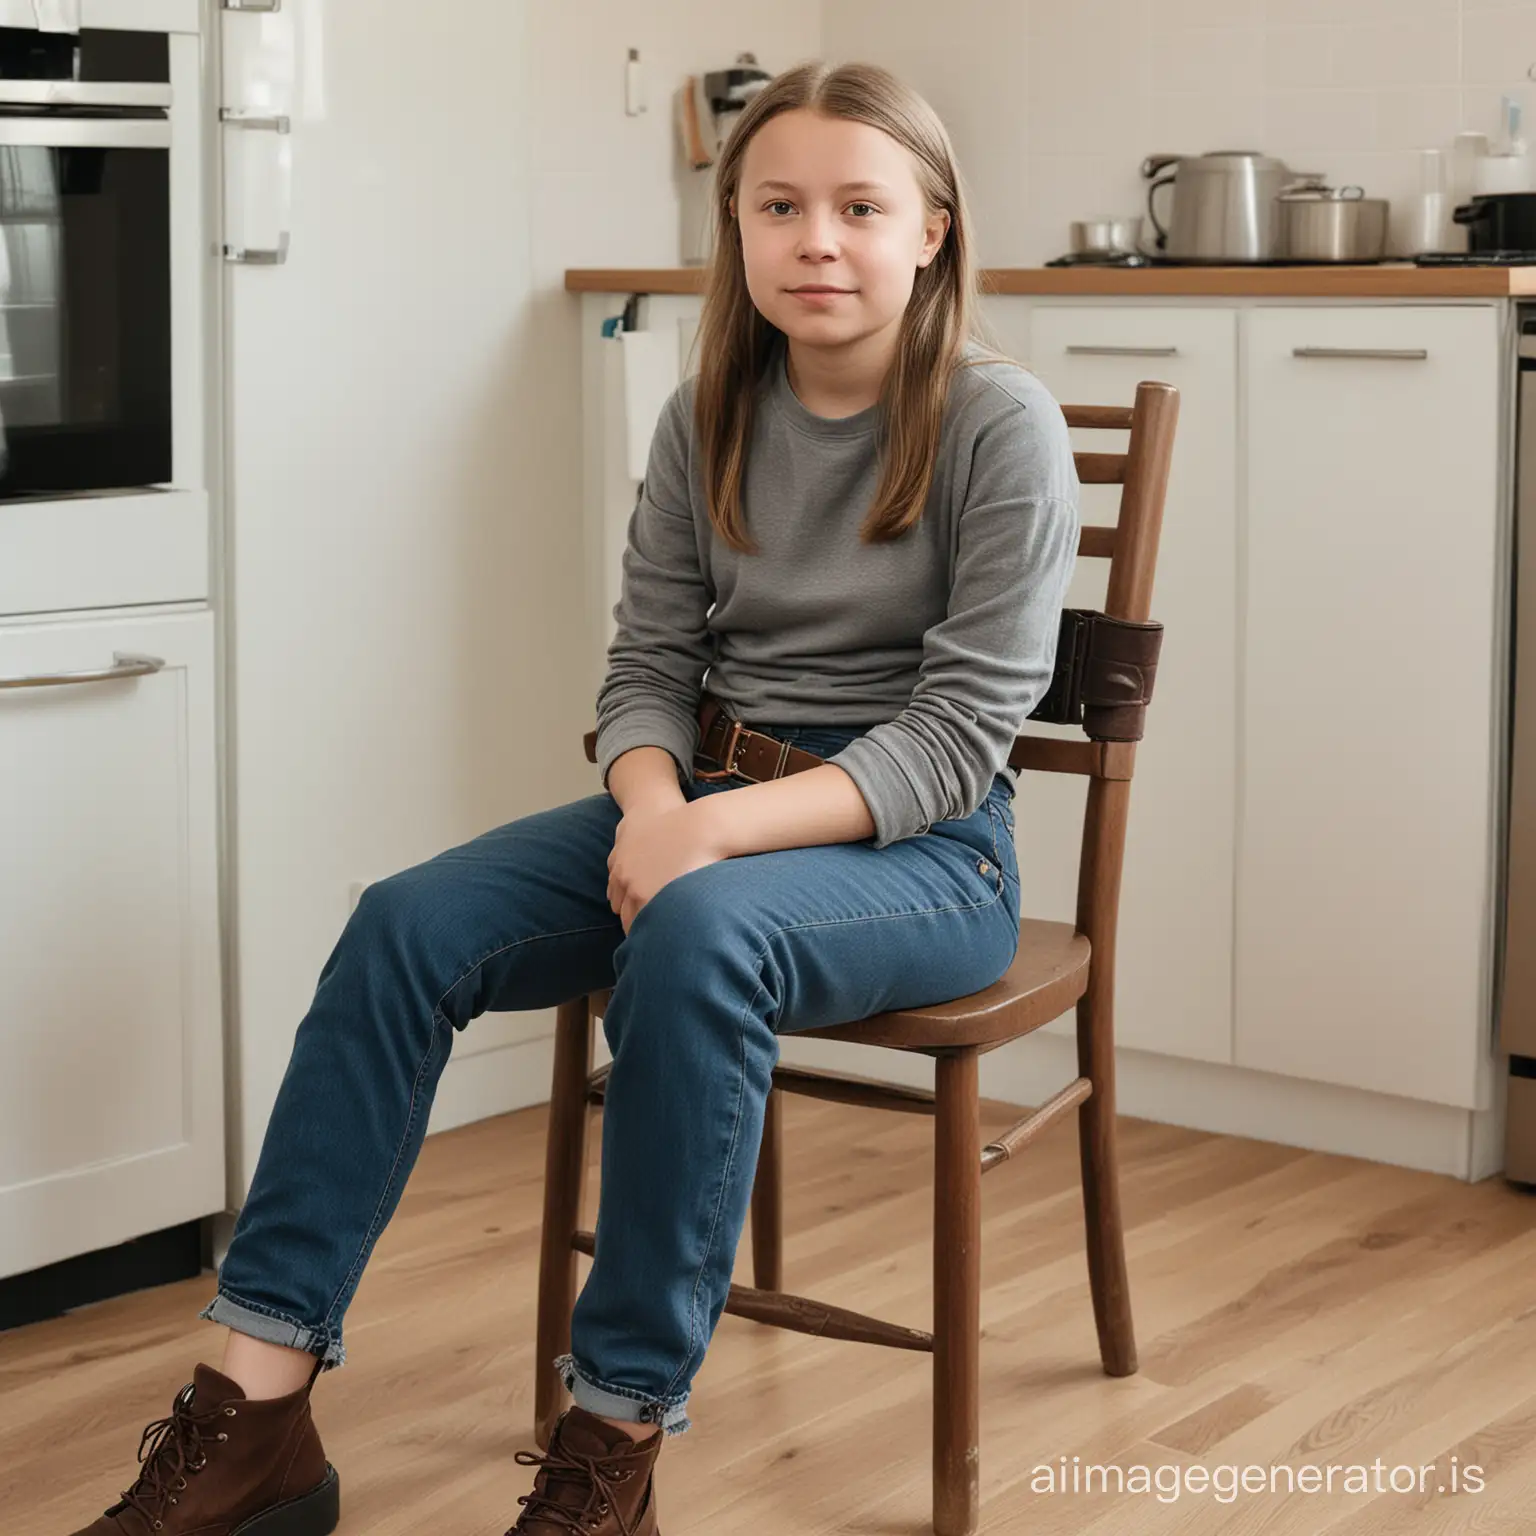 a real photo of greta thunberg,sitting on a chair,skinny jeans with belt,stern face,kitchen